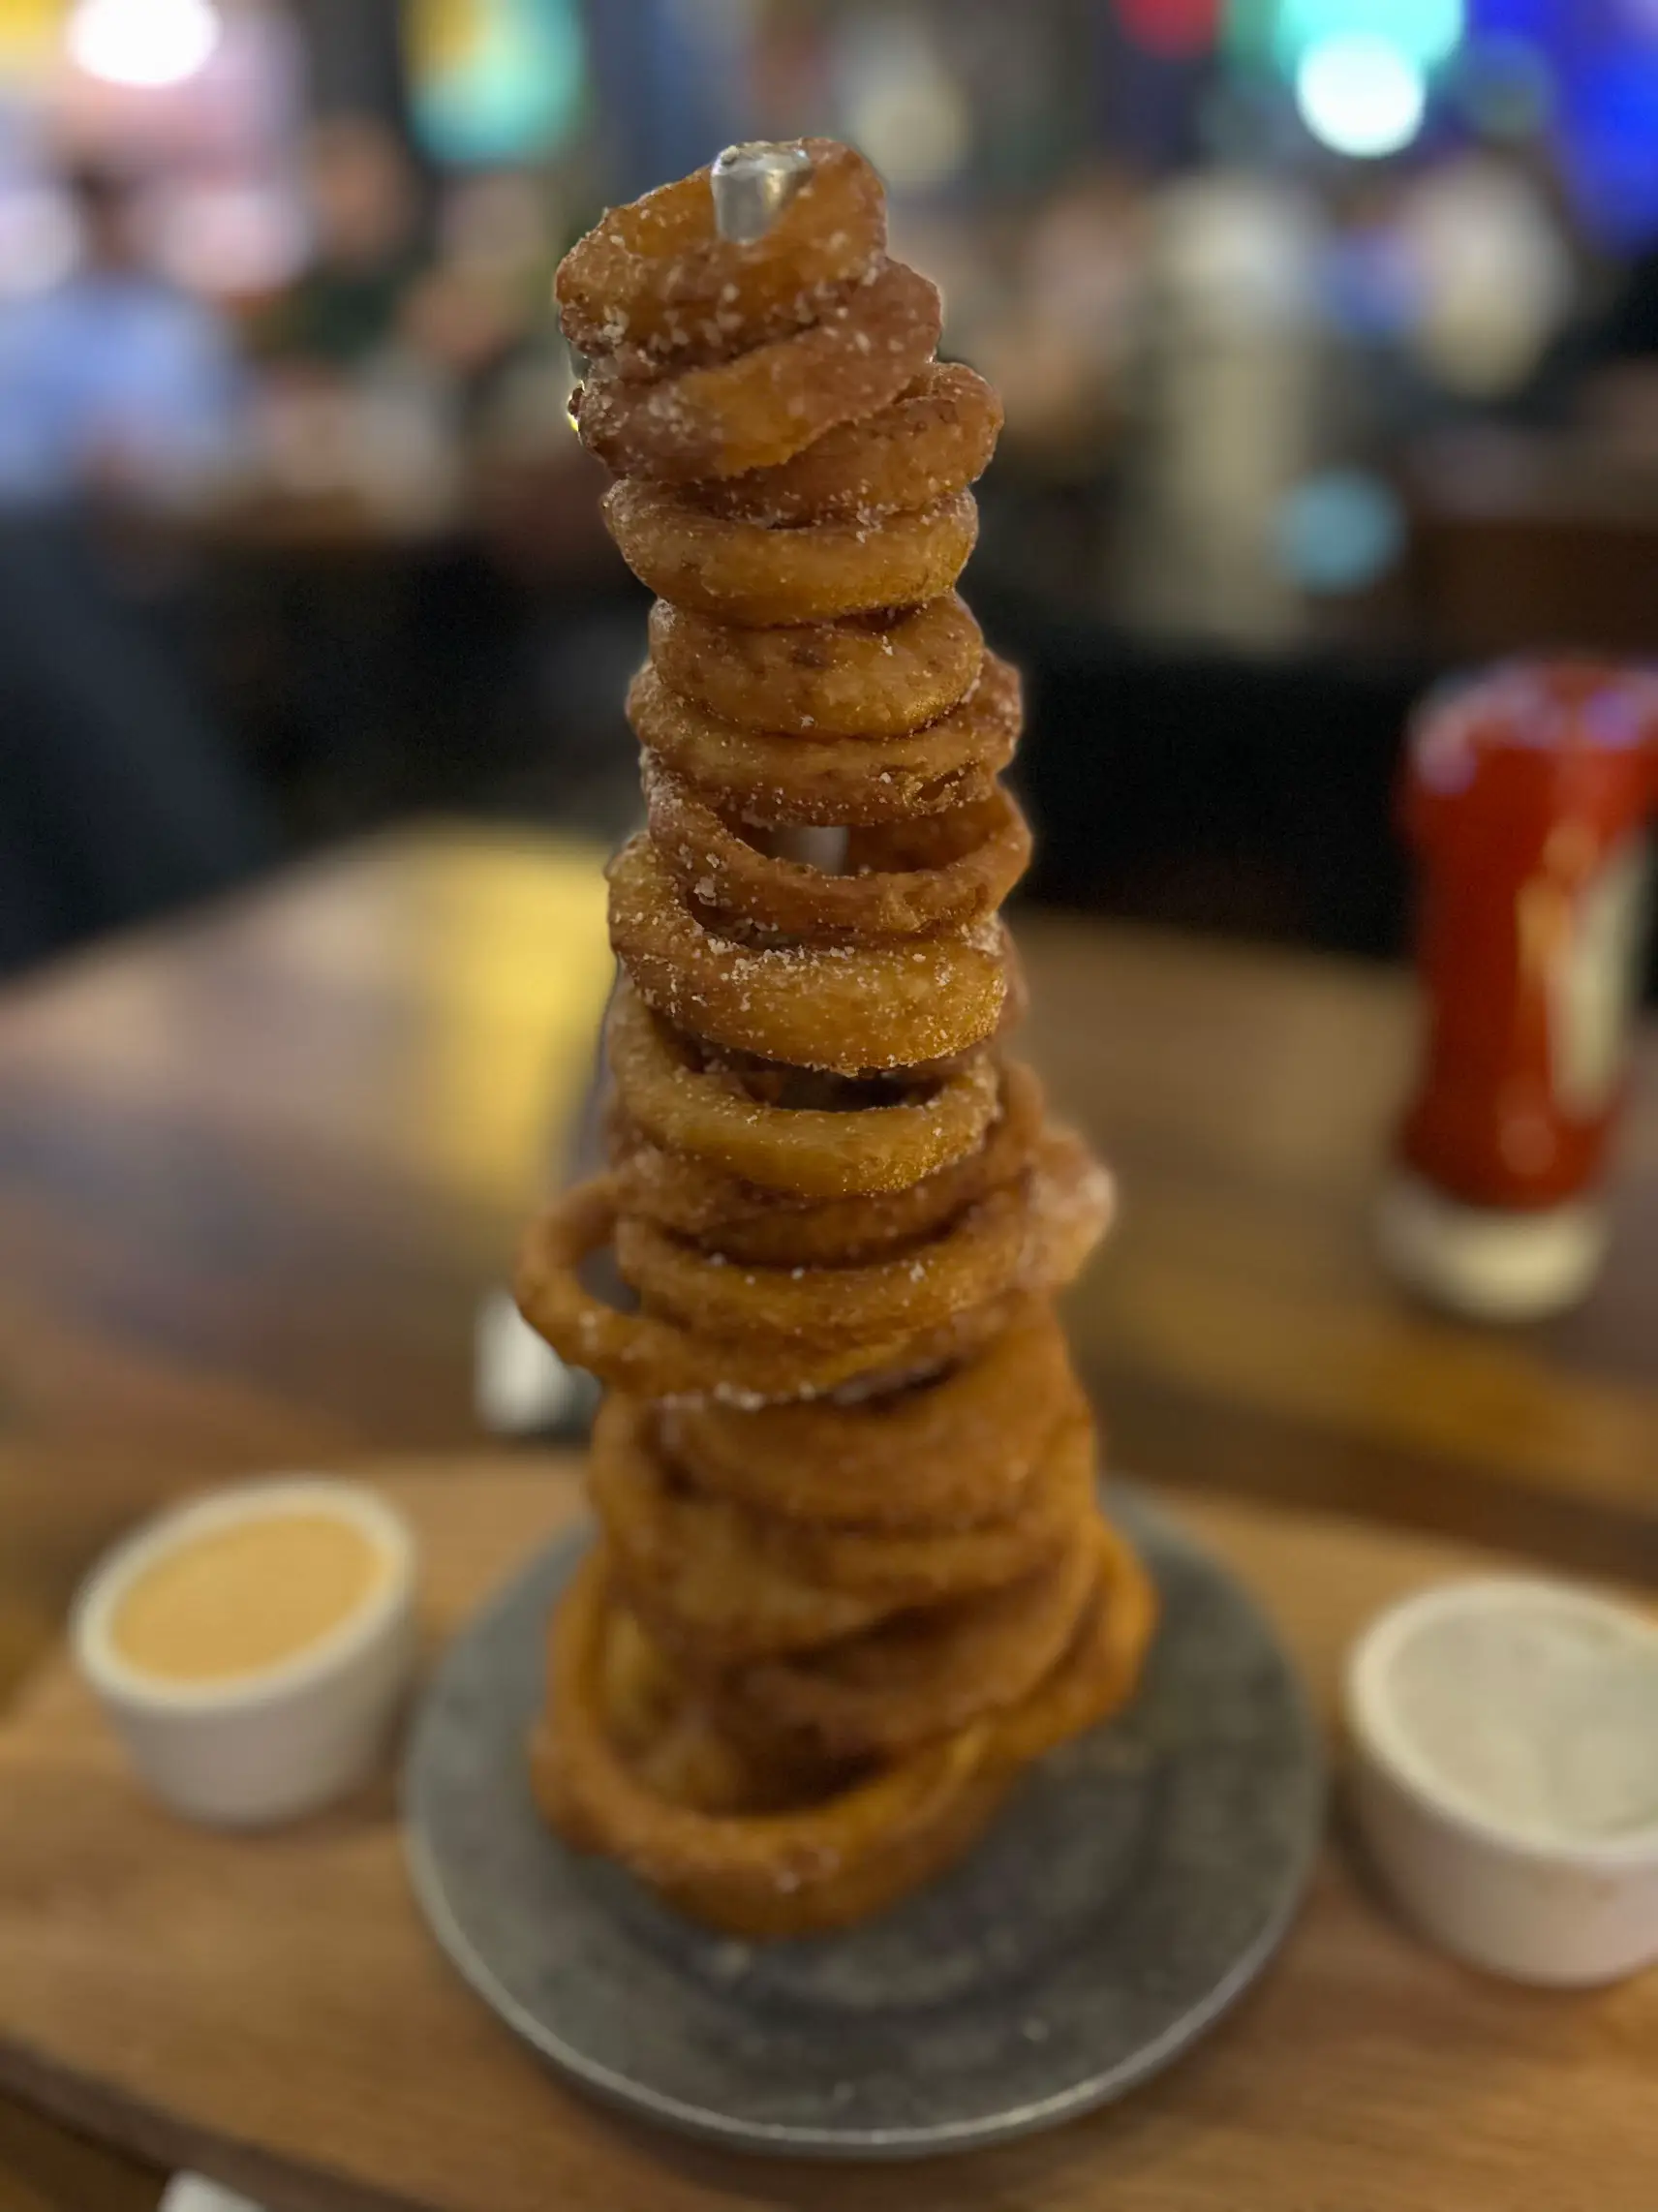  A stack of fried food on a table.